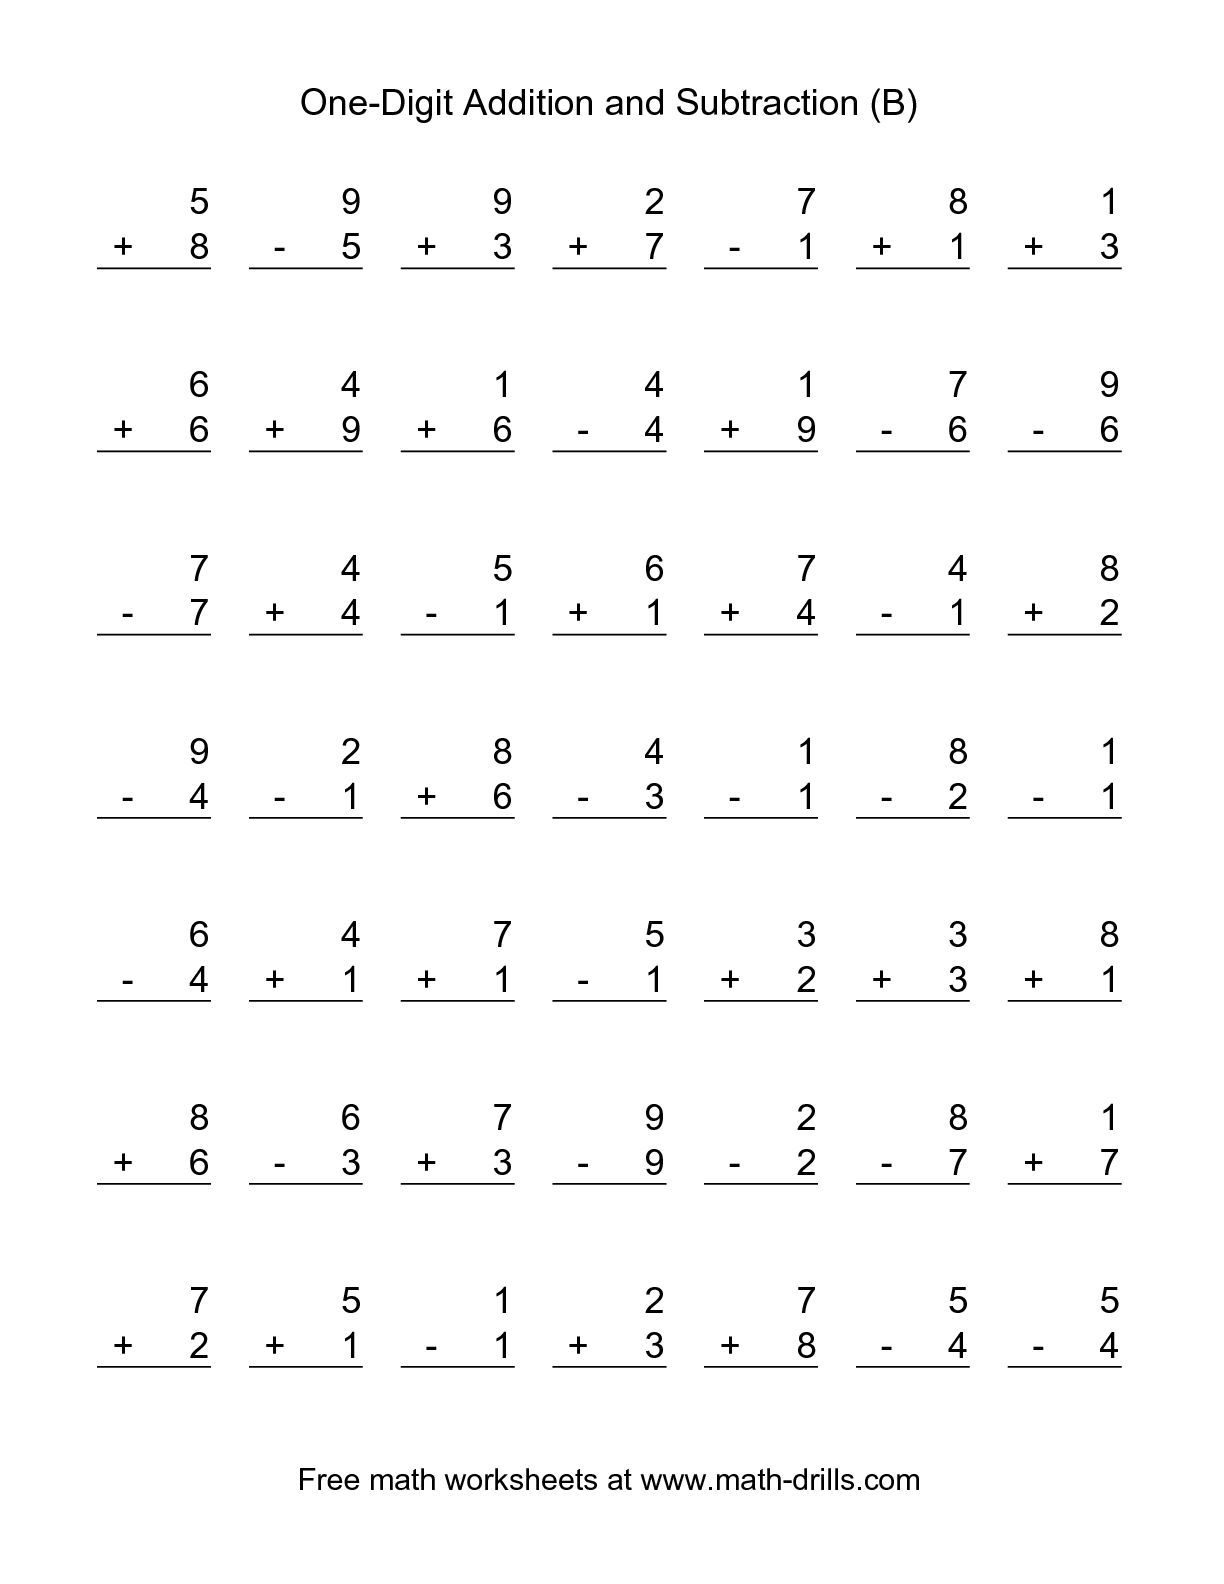 The Adding And Subtracting Single Digit Numbers B Mixed Operations